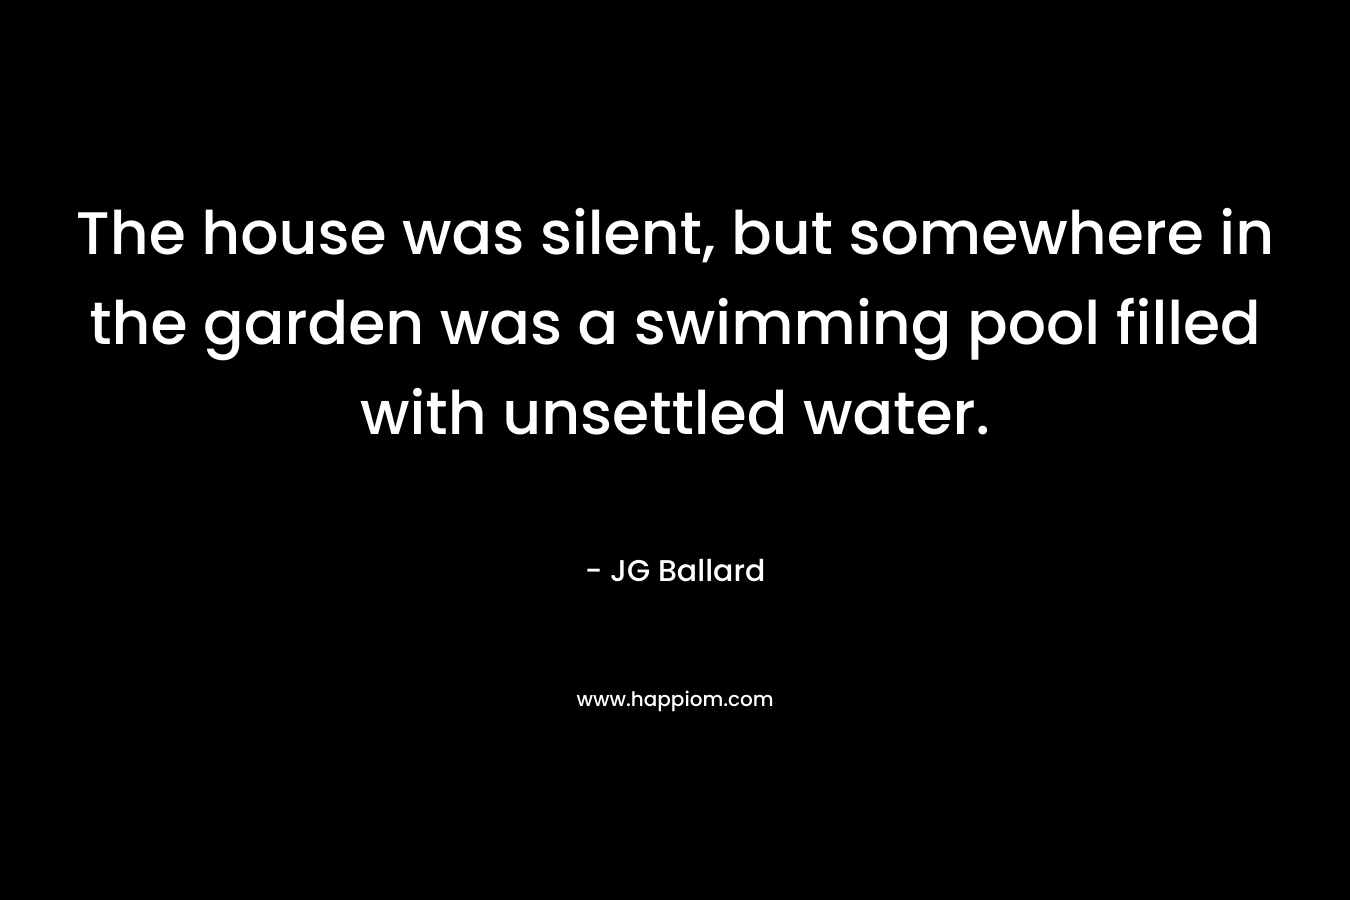 The house was silent, but somewhere in the garden was a swimming pool filled with unsettled water. – JG Ballard